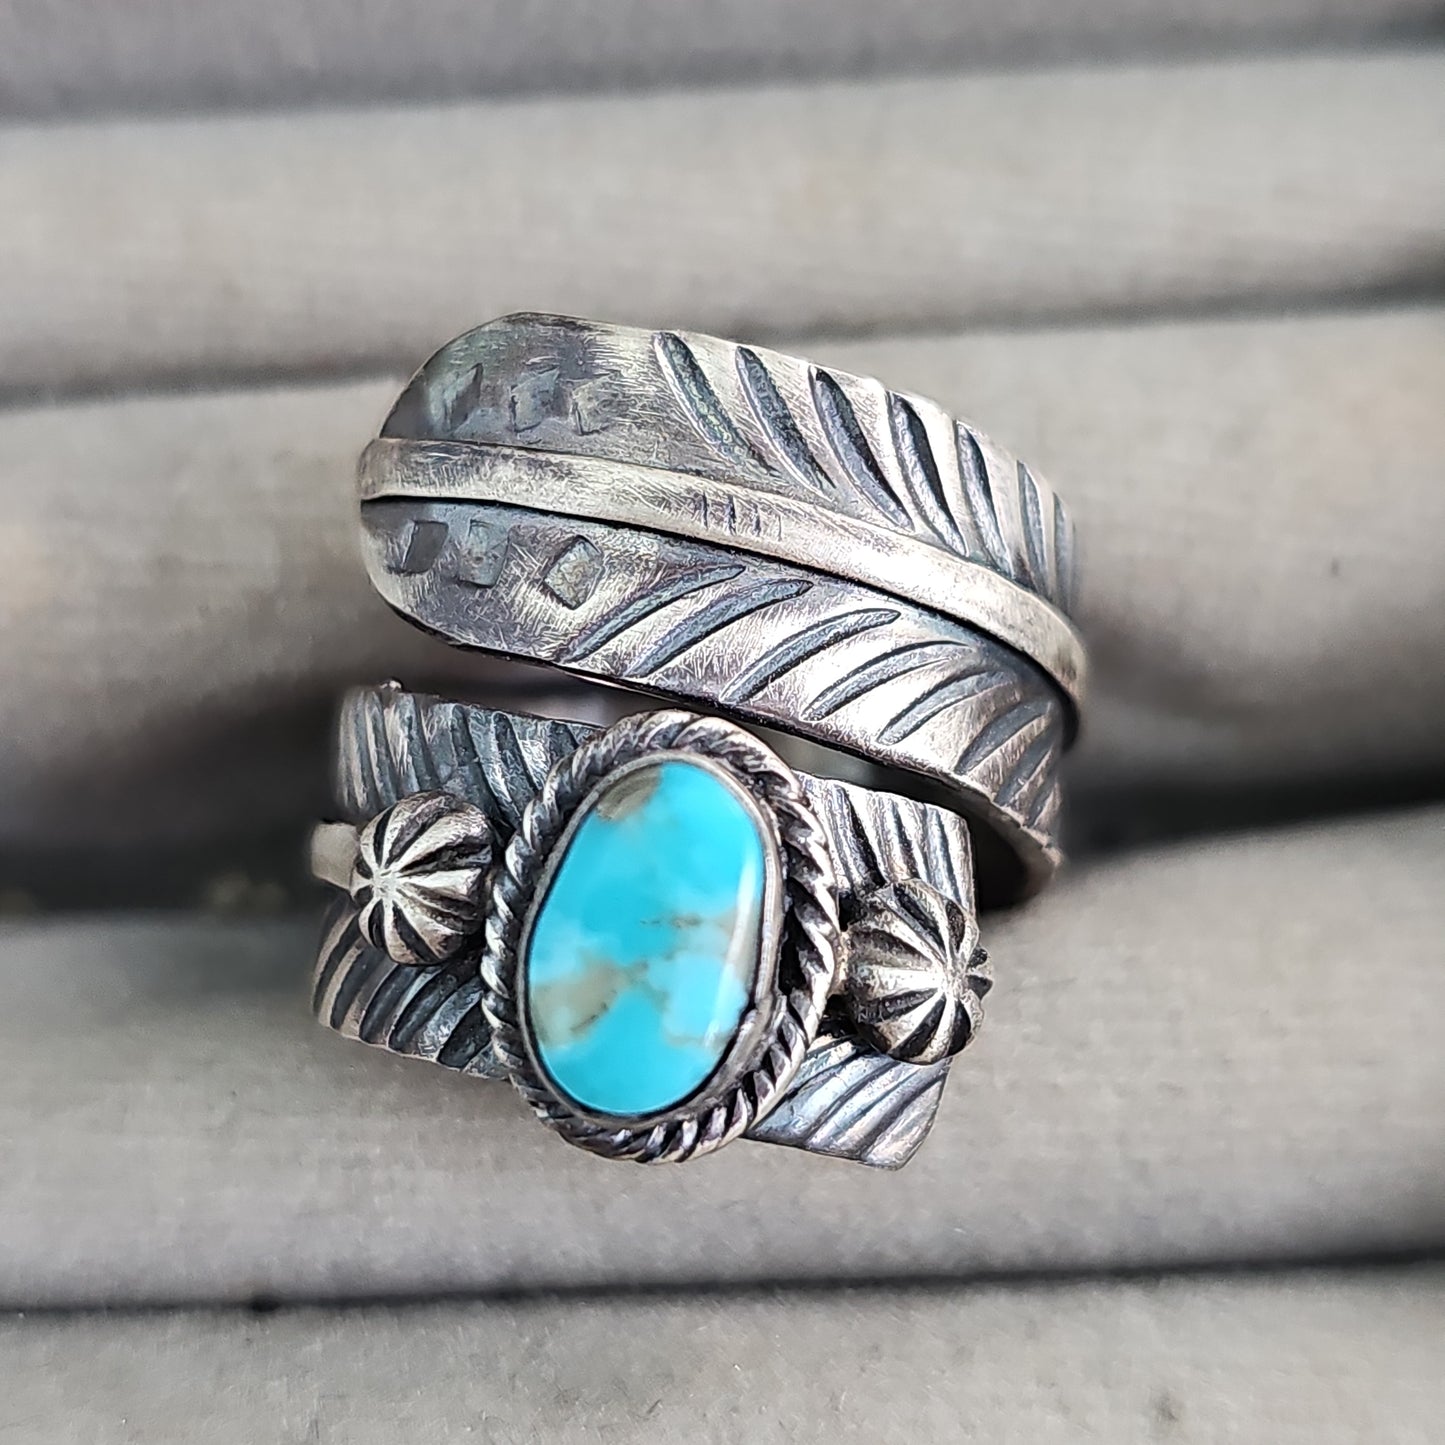 Heavy feather ring